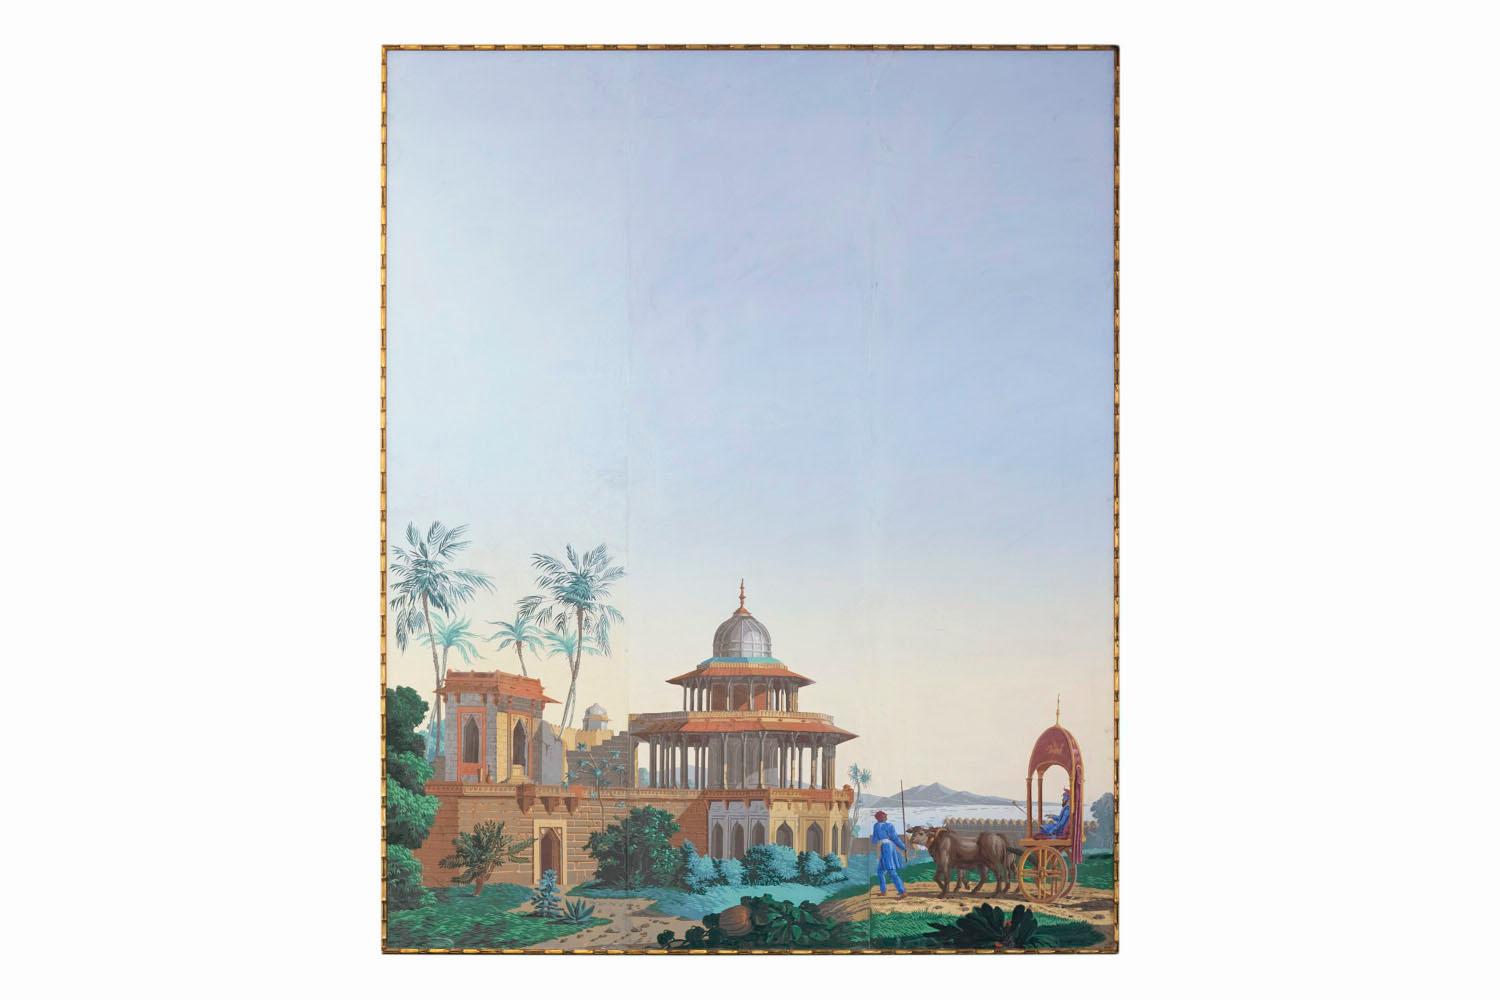 Two wallpaper panels realized by the French Zuber manufacture parts of the panoramic decor “The Hindoustan”. We can see Indian style buildings and characters.
On one strip, there is one islamic style architecture temple and on the other one a